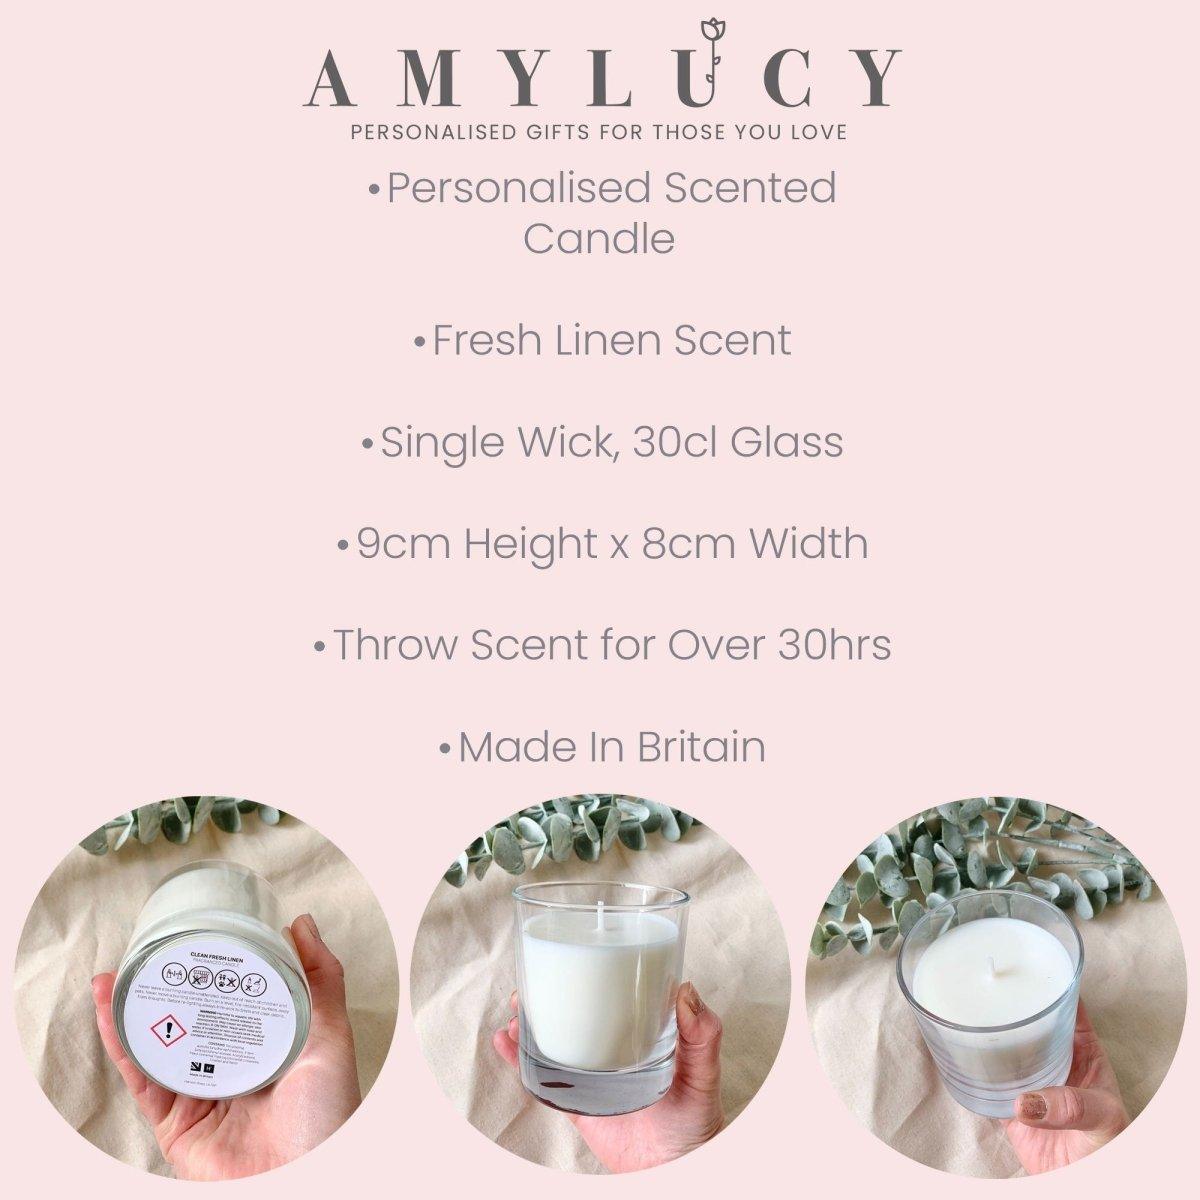 Nanny Gift Candle, Personalised Candle, Nanny Gift, Candle in Jar, Custom Candle Best Friend Candle, Candle Gifts, Nanny Gift, Nanny - Amy Lucy